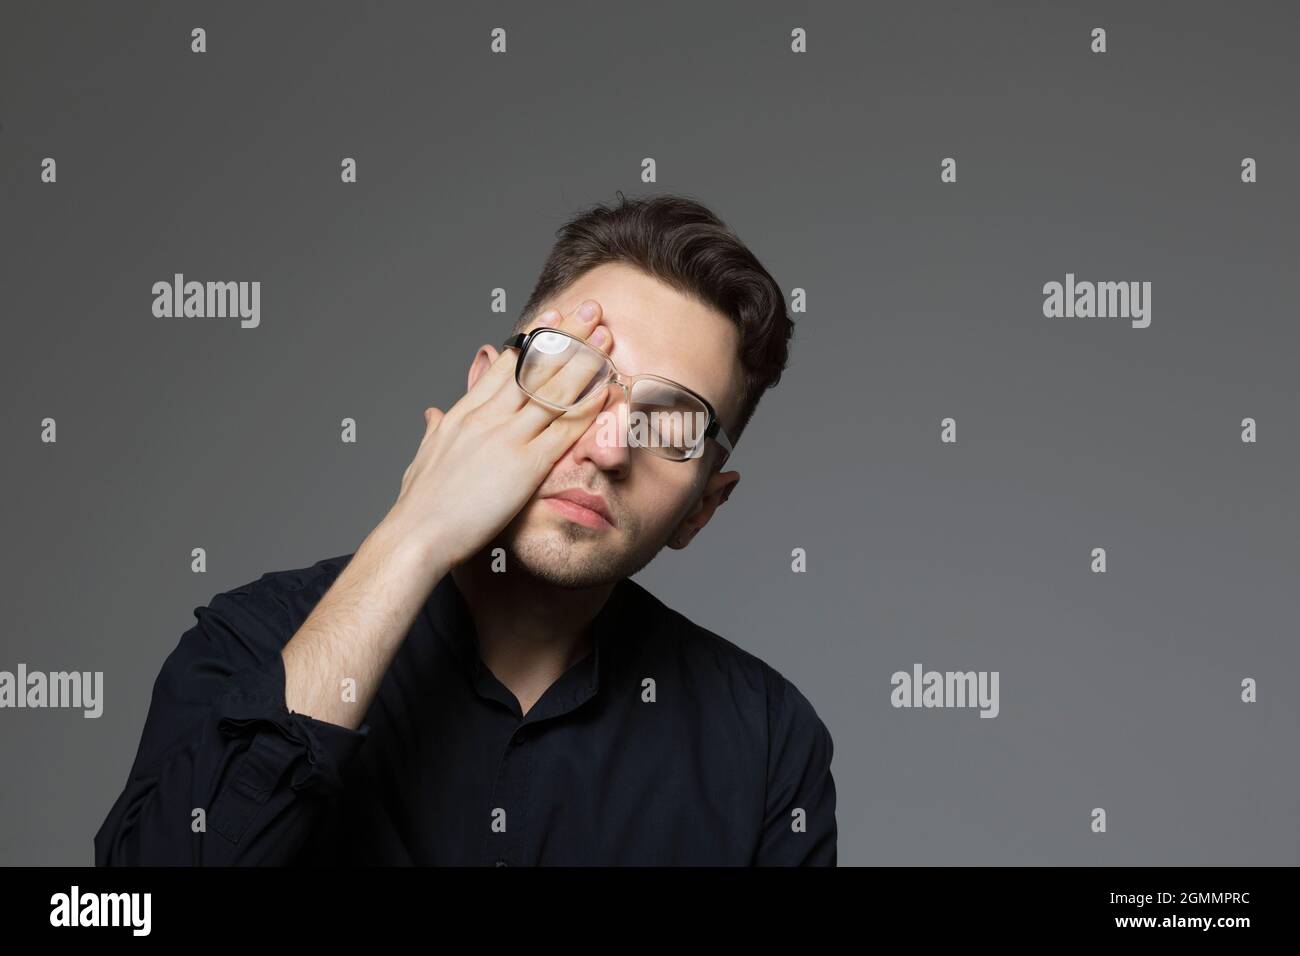 Tired young man rubbing eyes Stock Photo